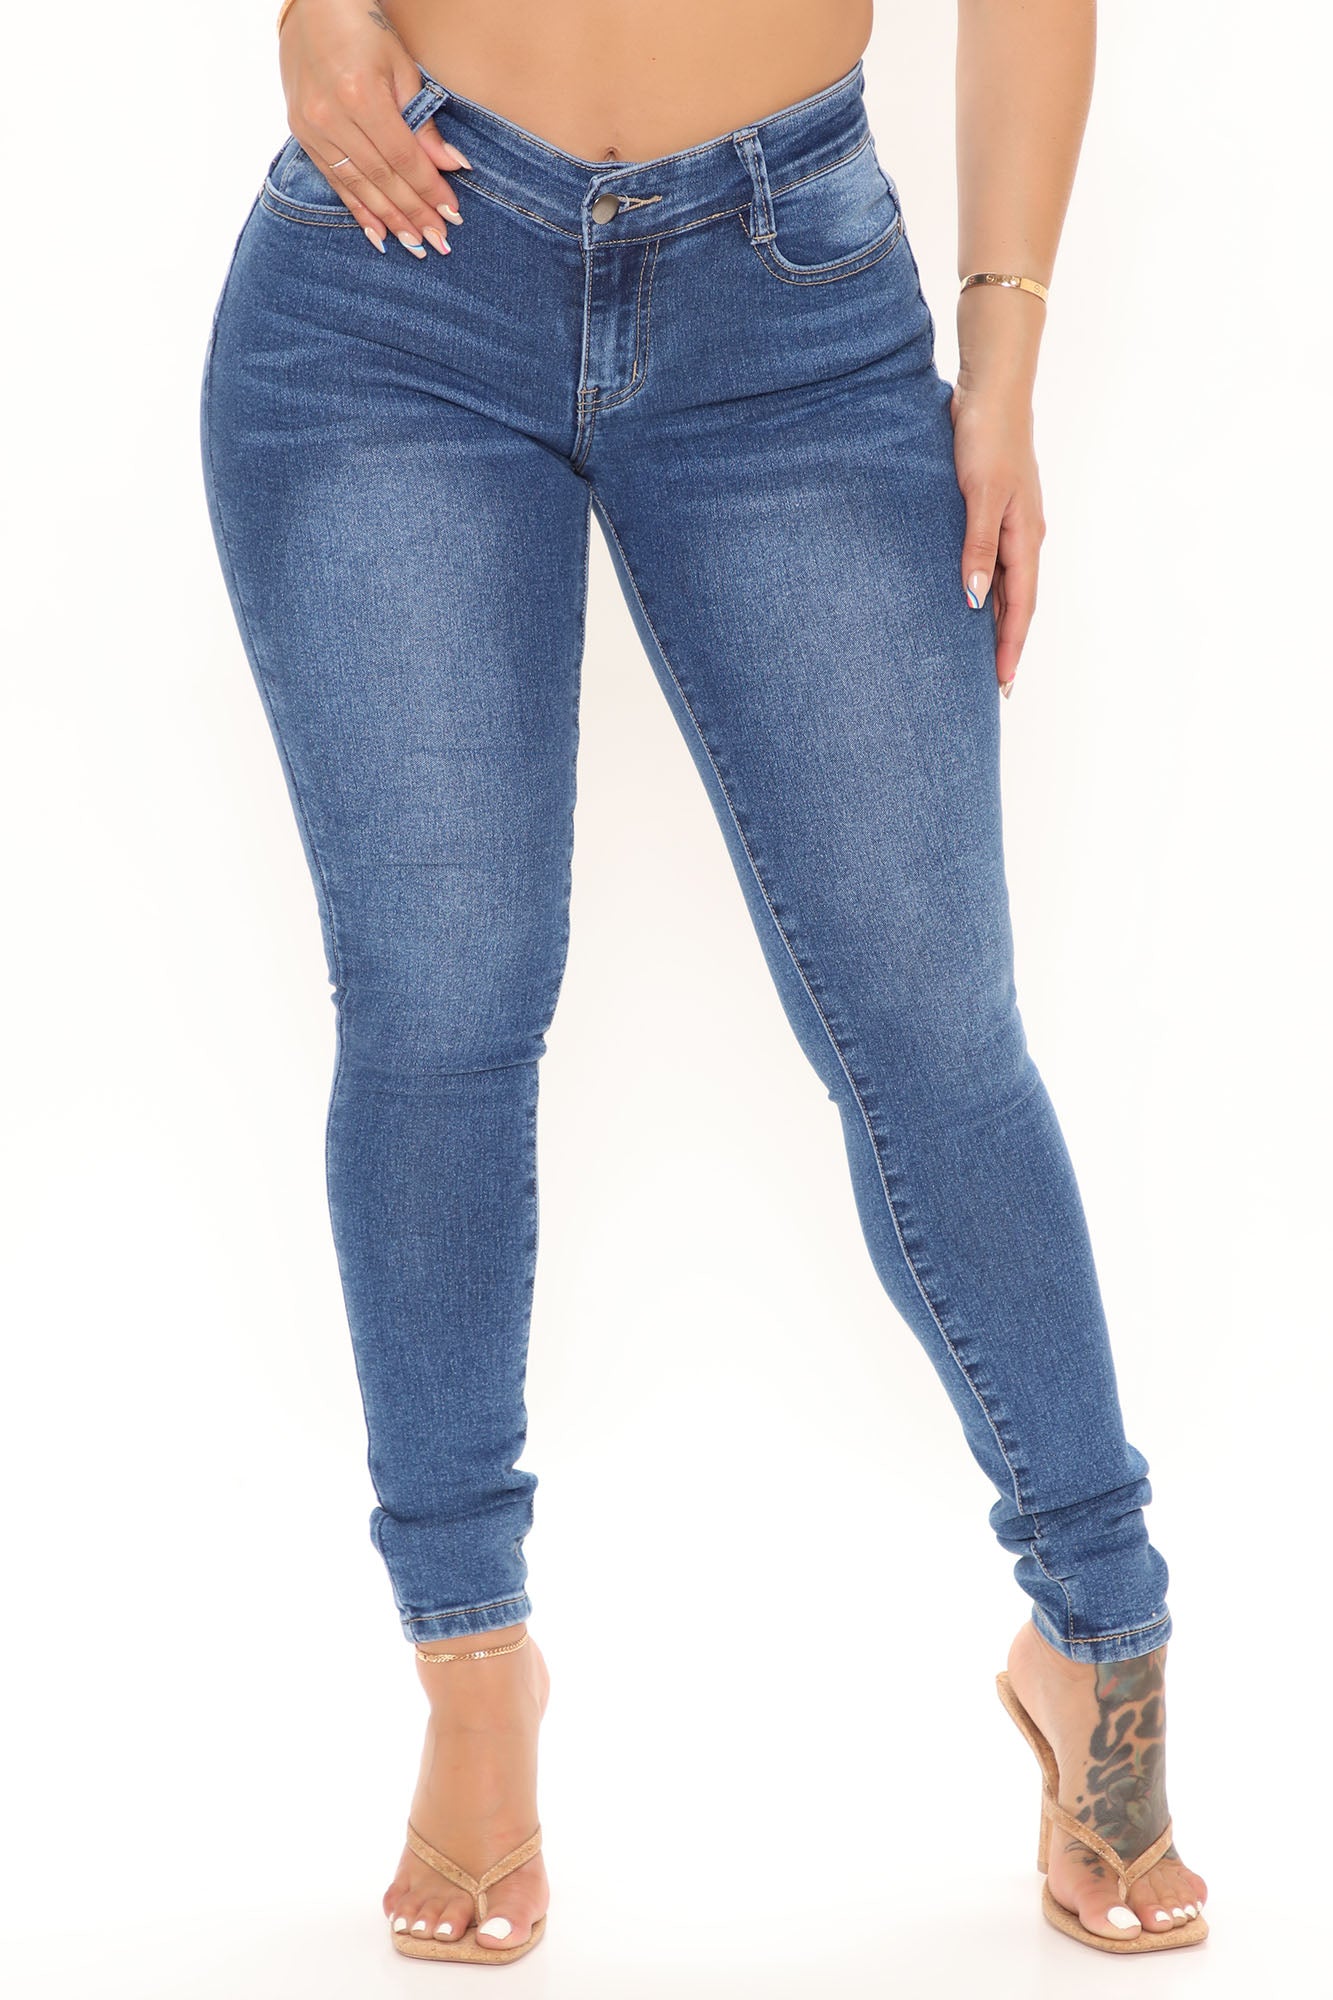 I Just Might Booty Shaping Jeans - Medium Wash